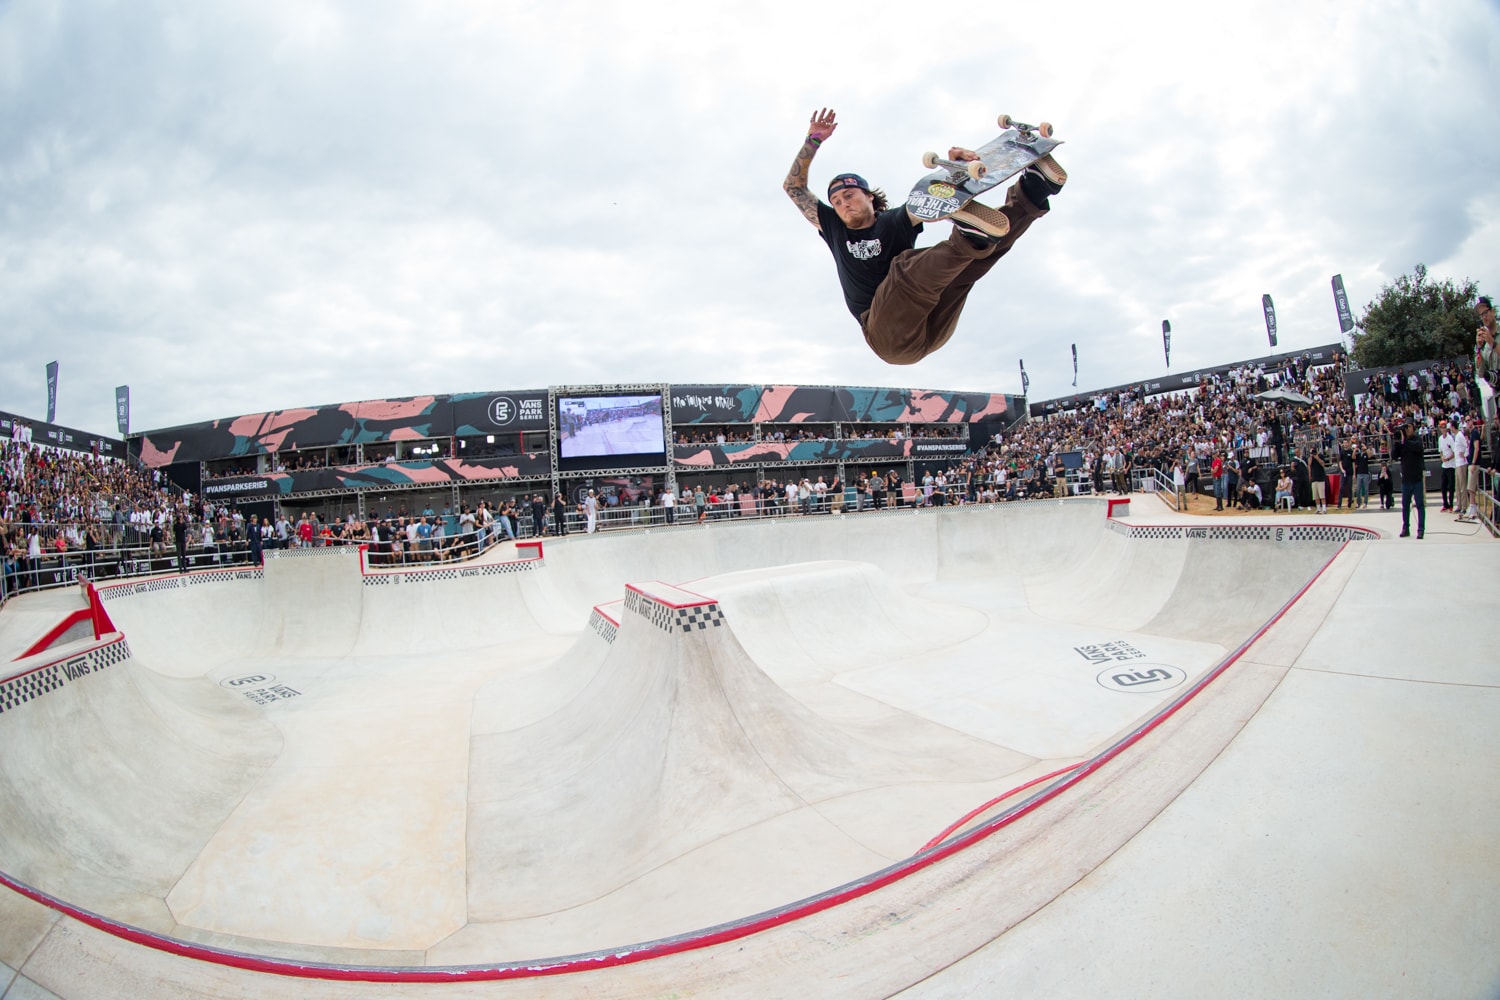 VANS PARK SERIES CONTINUES THIS IN SAO PAULO, BRAZIL | The Berrics